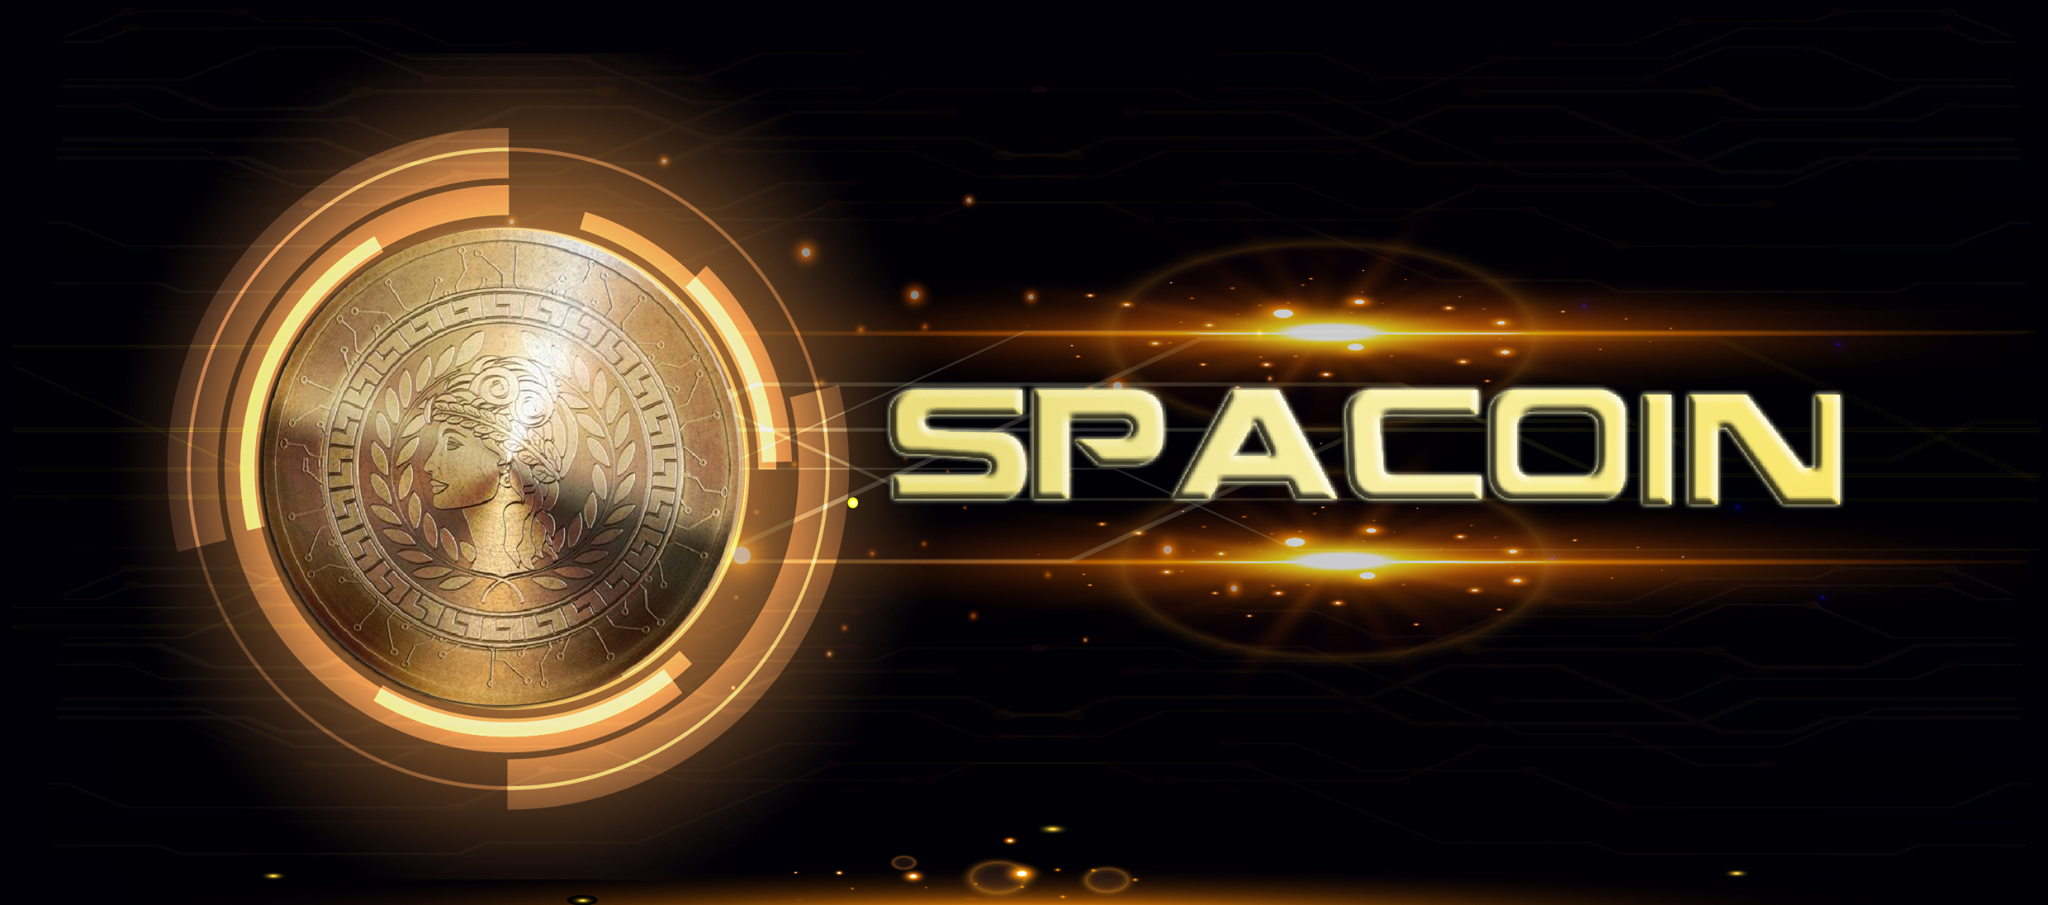 SPACOIN: The First Spa Project-Applied Blockchain in the World